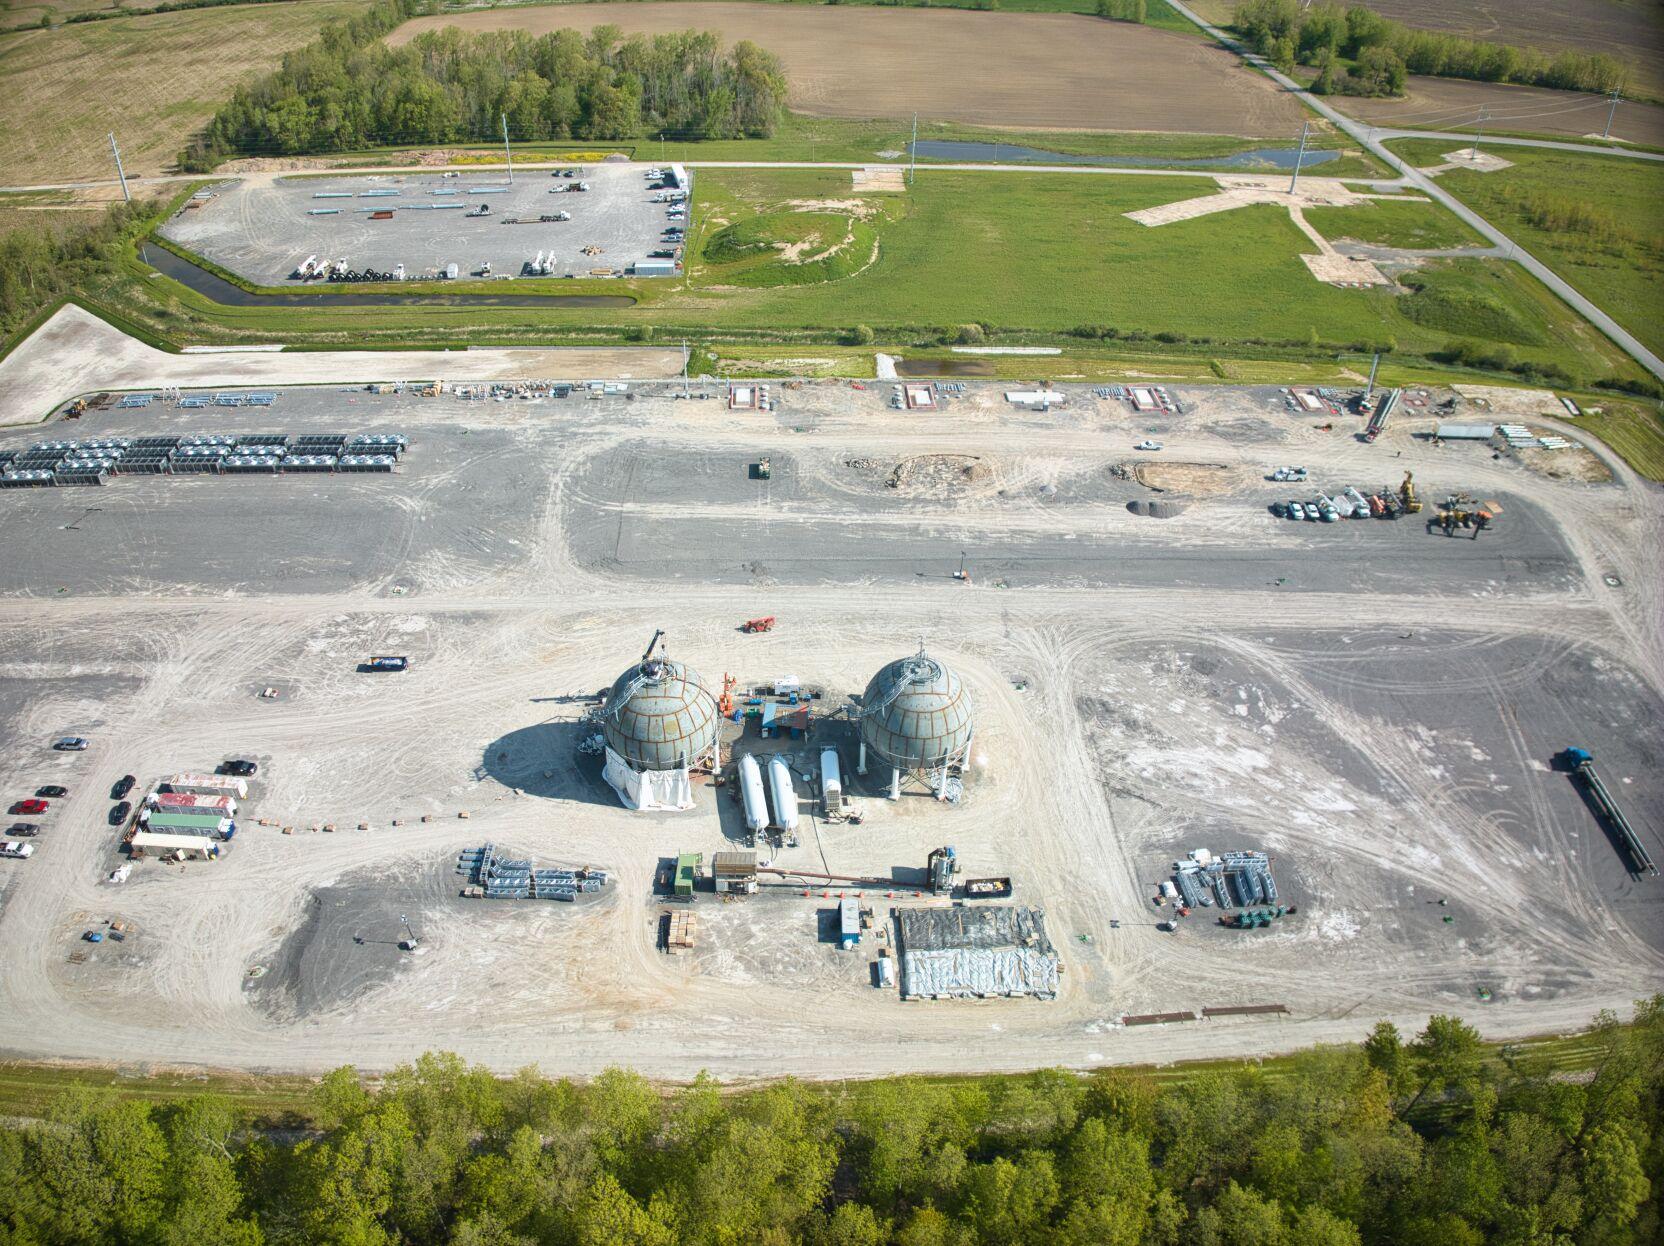 Plug Power's plant under construction at the Science, Technology and Advanced Manufacturing Park, or STAMP, in Genesee County, New York. Credit: Photo courtesy of the Genesee County Economic Development Center